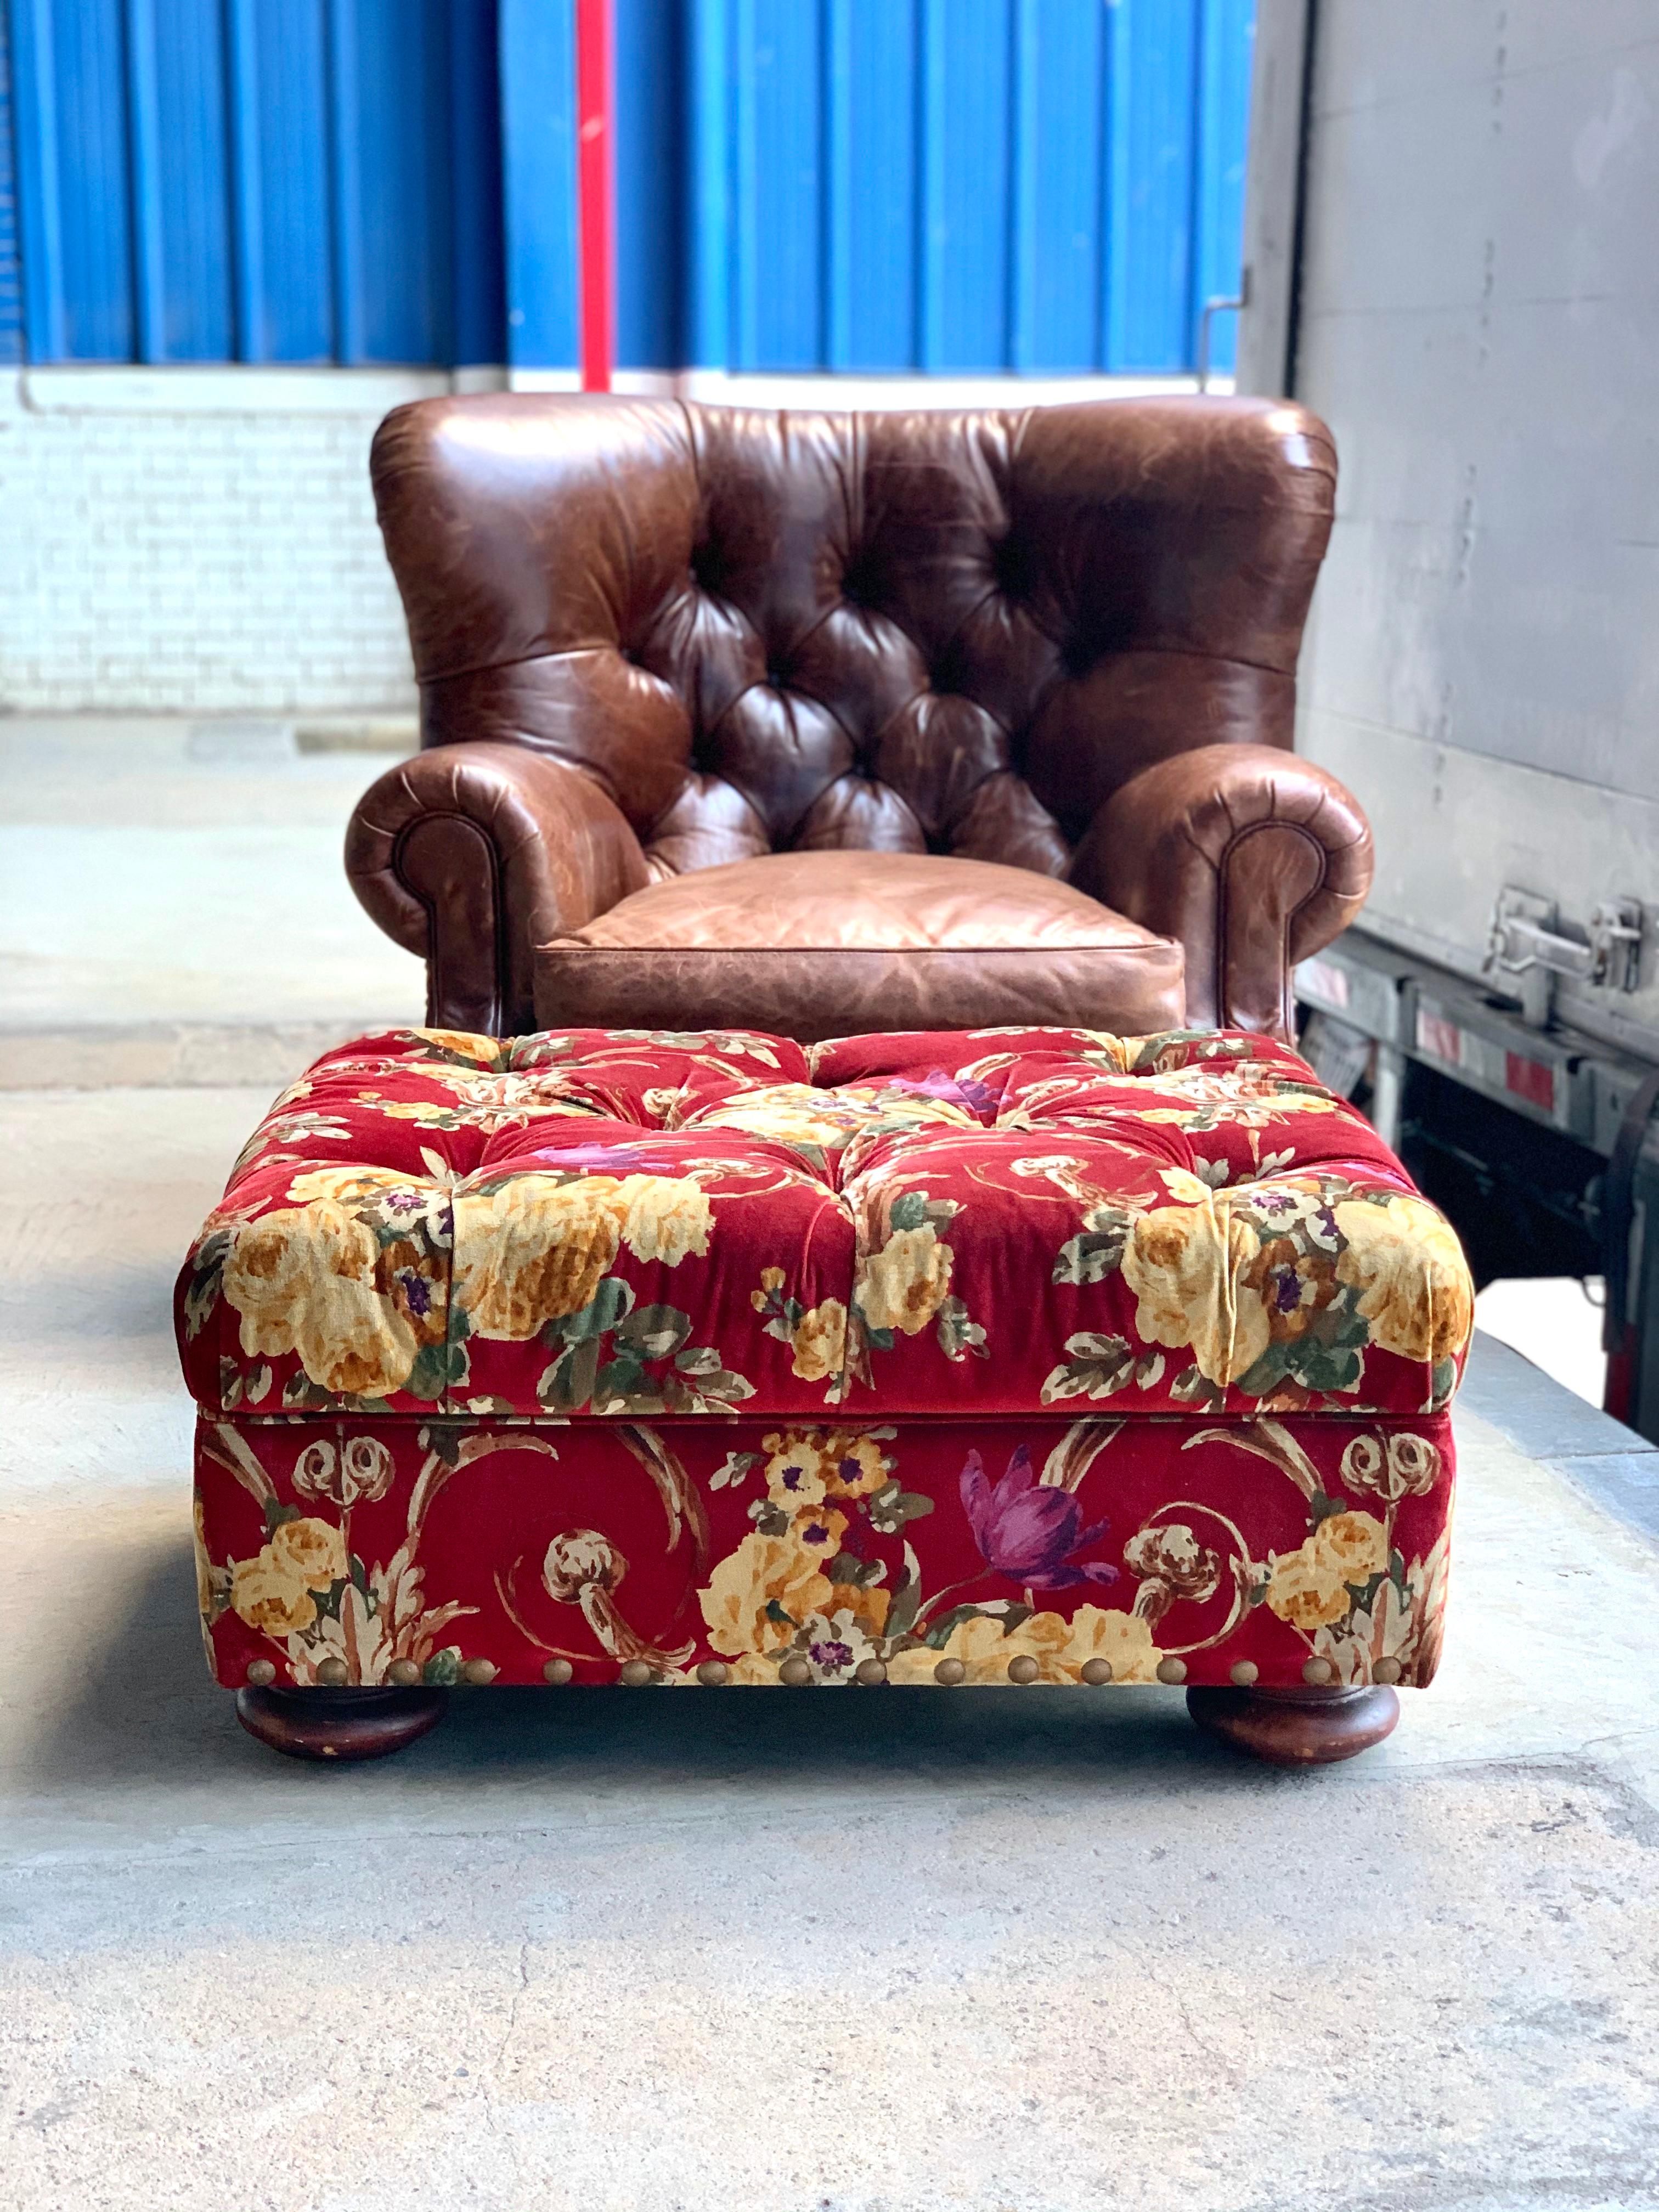 Iconic brown leather writer's lounge, armchair, red velvet floral ottoman. This iconic winged club chair with bold nailhead trim has a Classic tufted back and burnished mahogany bun feet. Ralph Lauren custom red velvet floral writer's ottoman